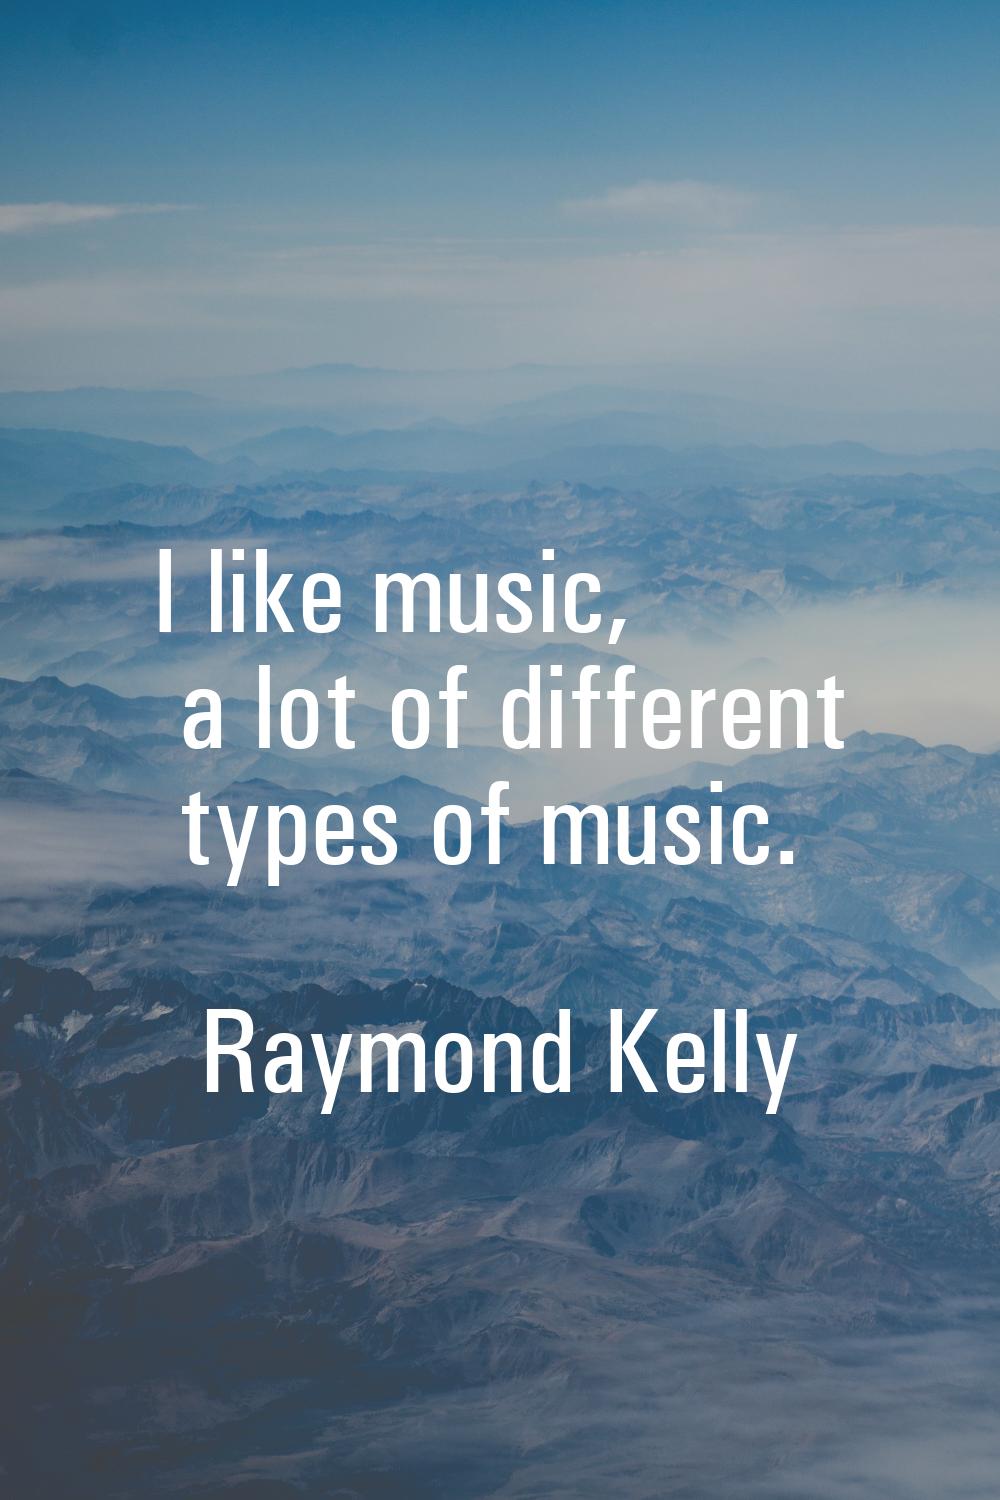 I like music, a lot of different types of music.